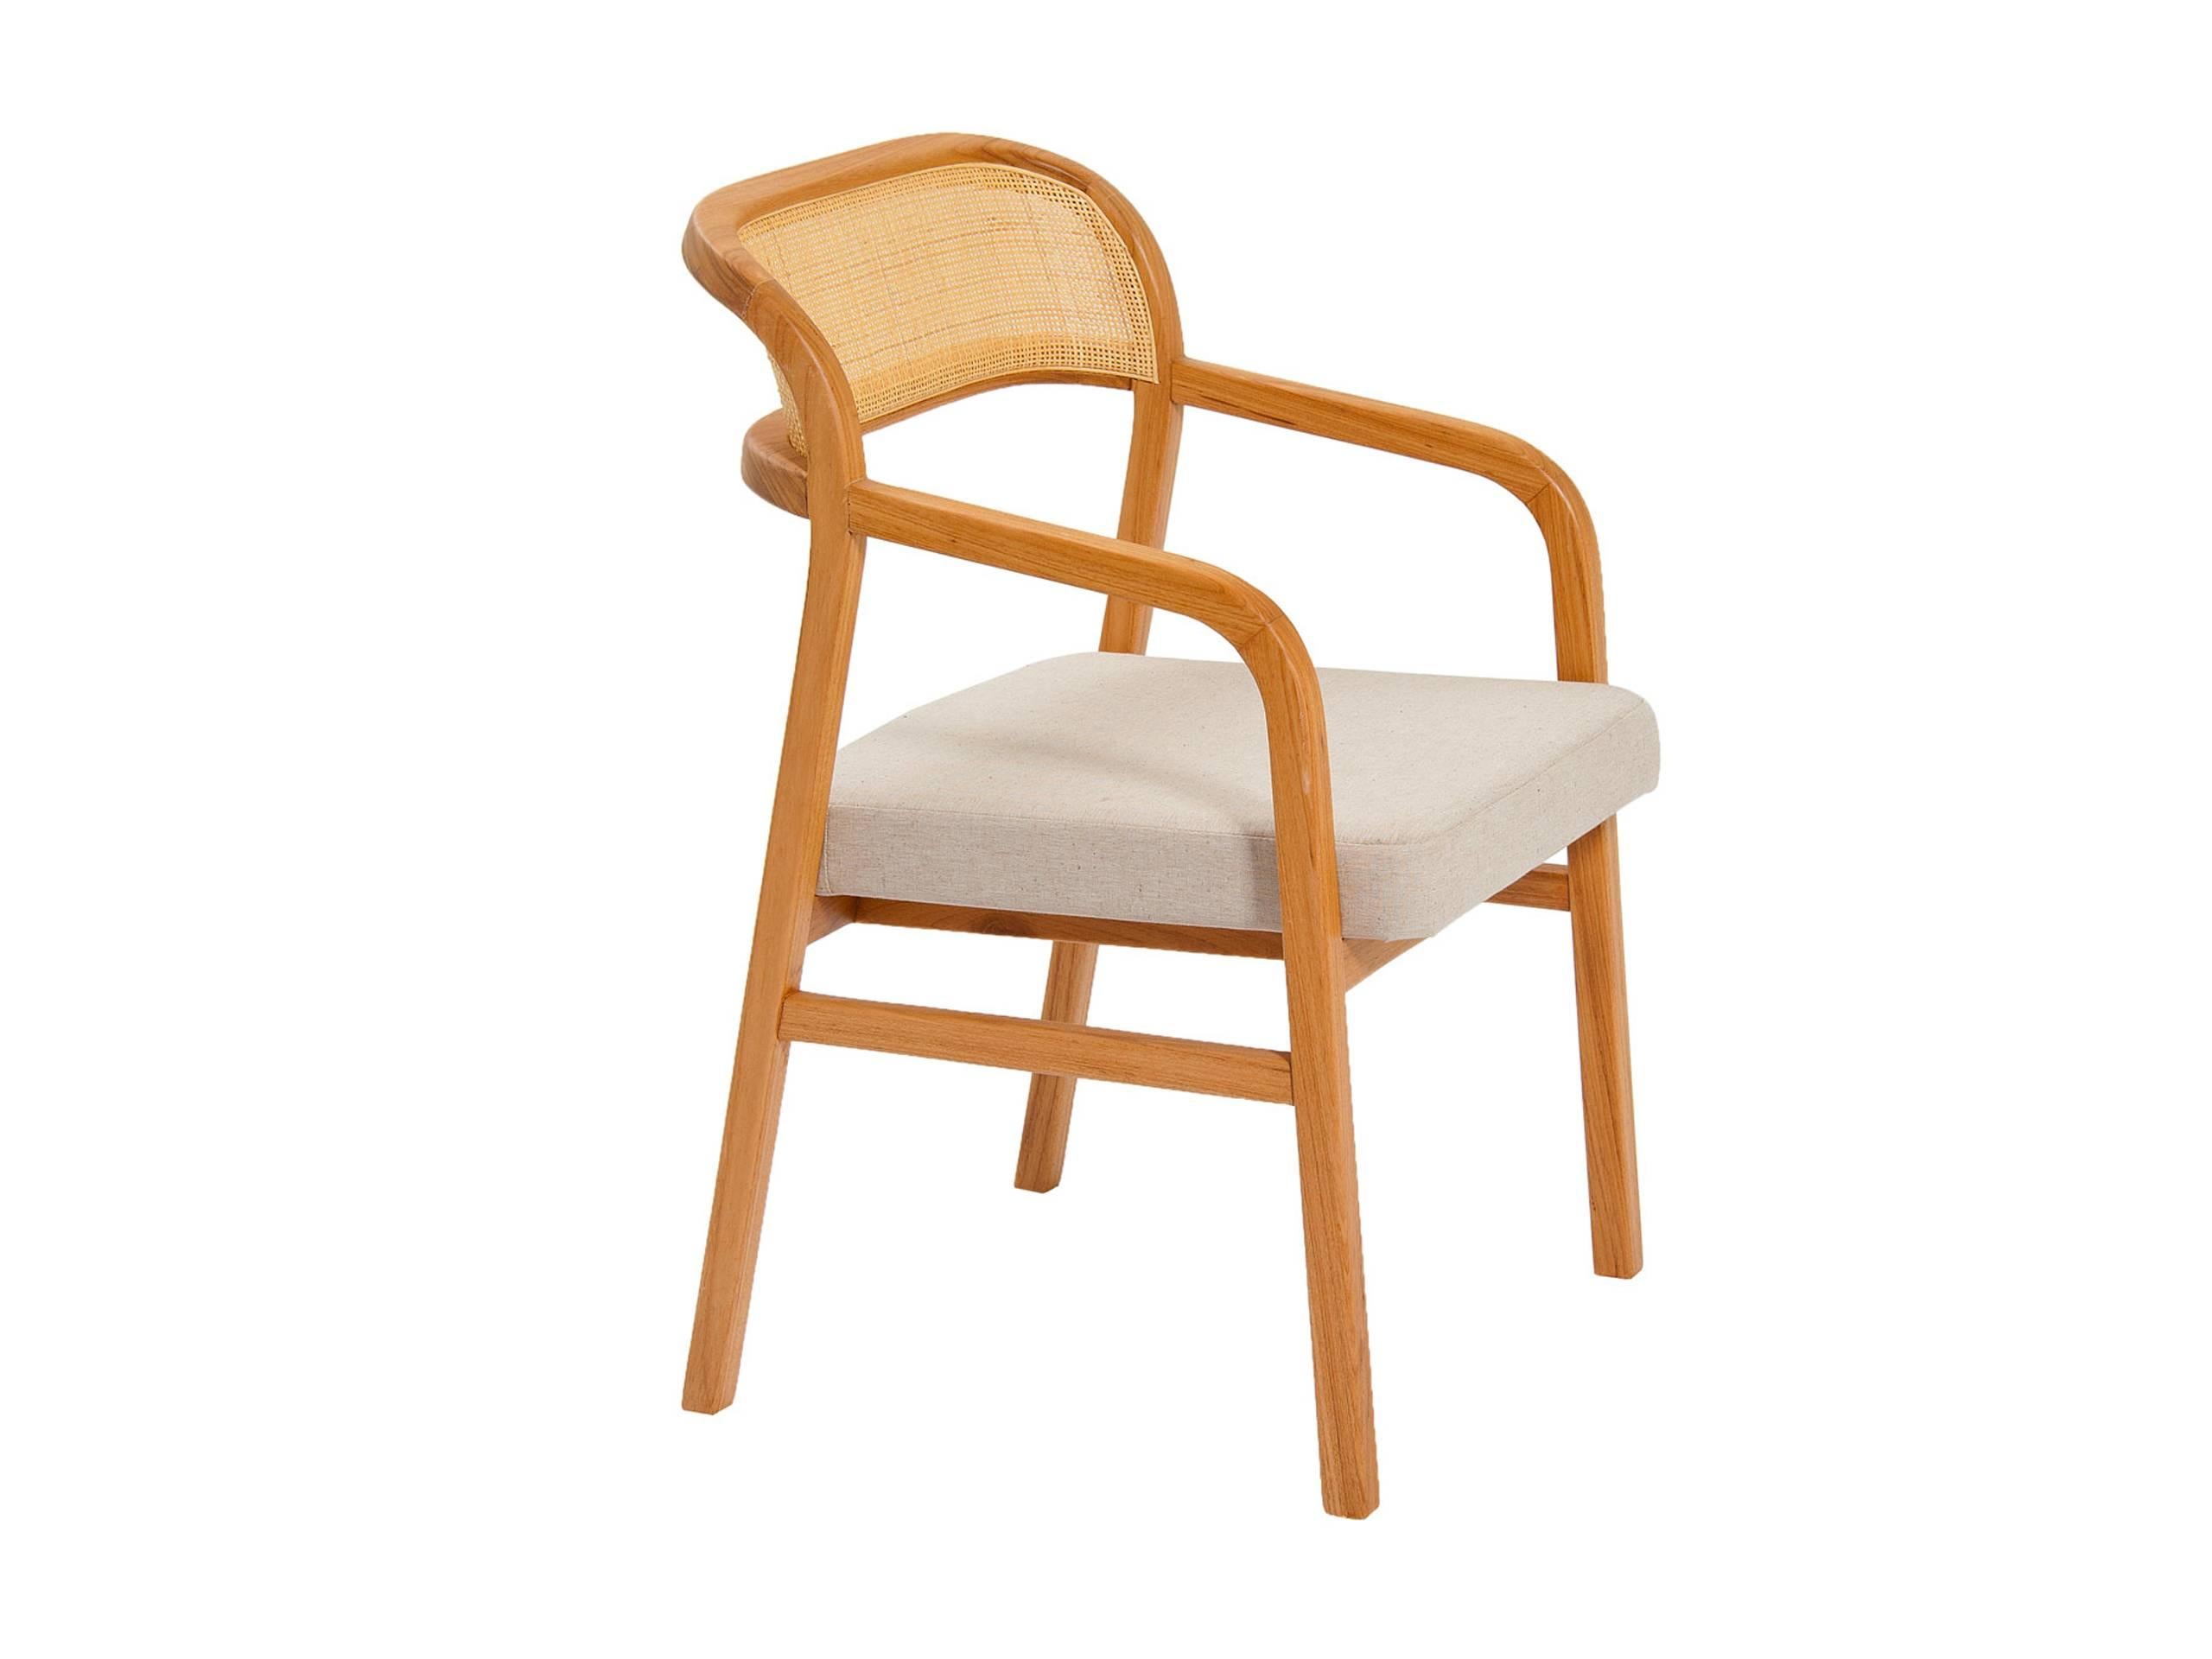 A design defined by two curved lines which join to form both legs and back of the chair.